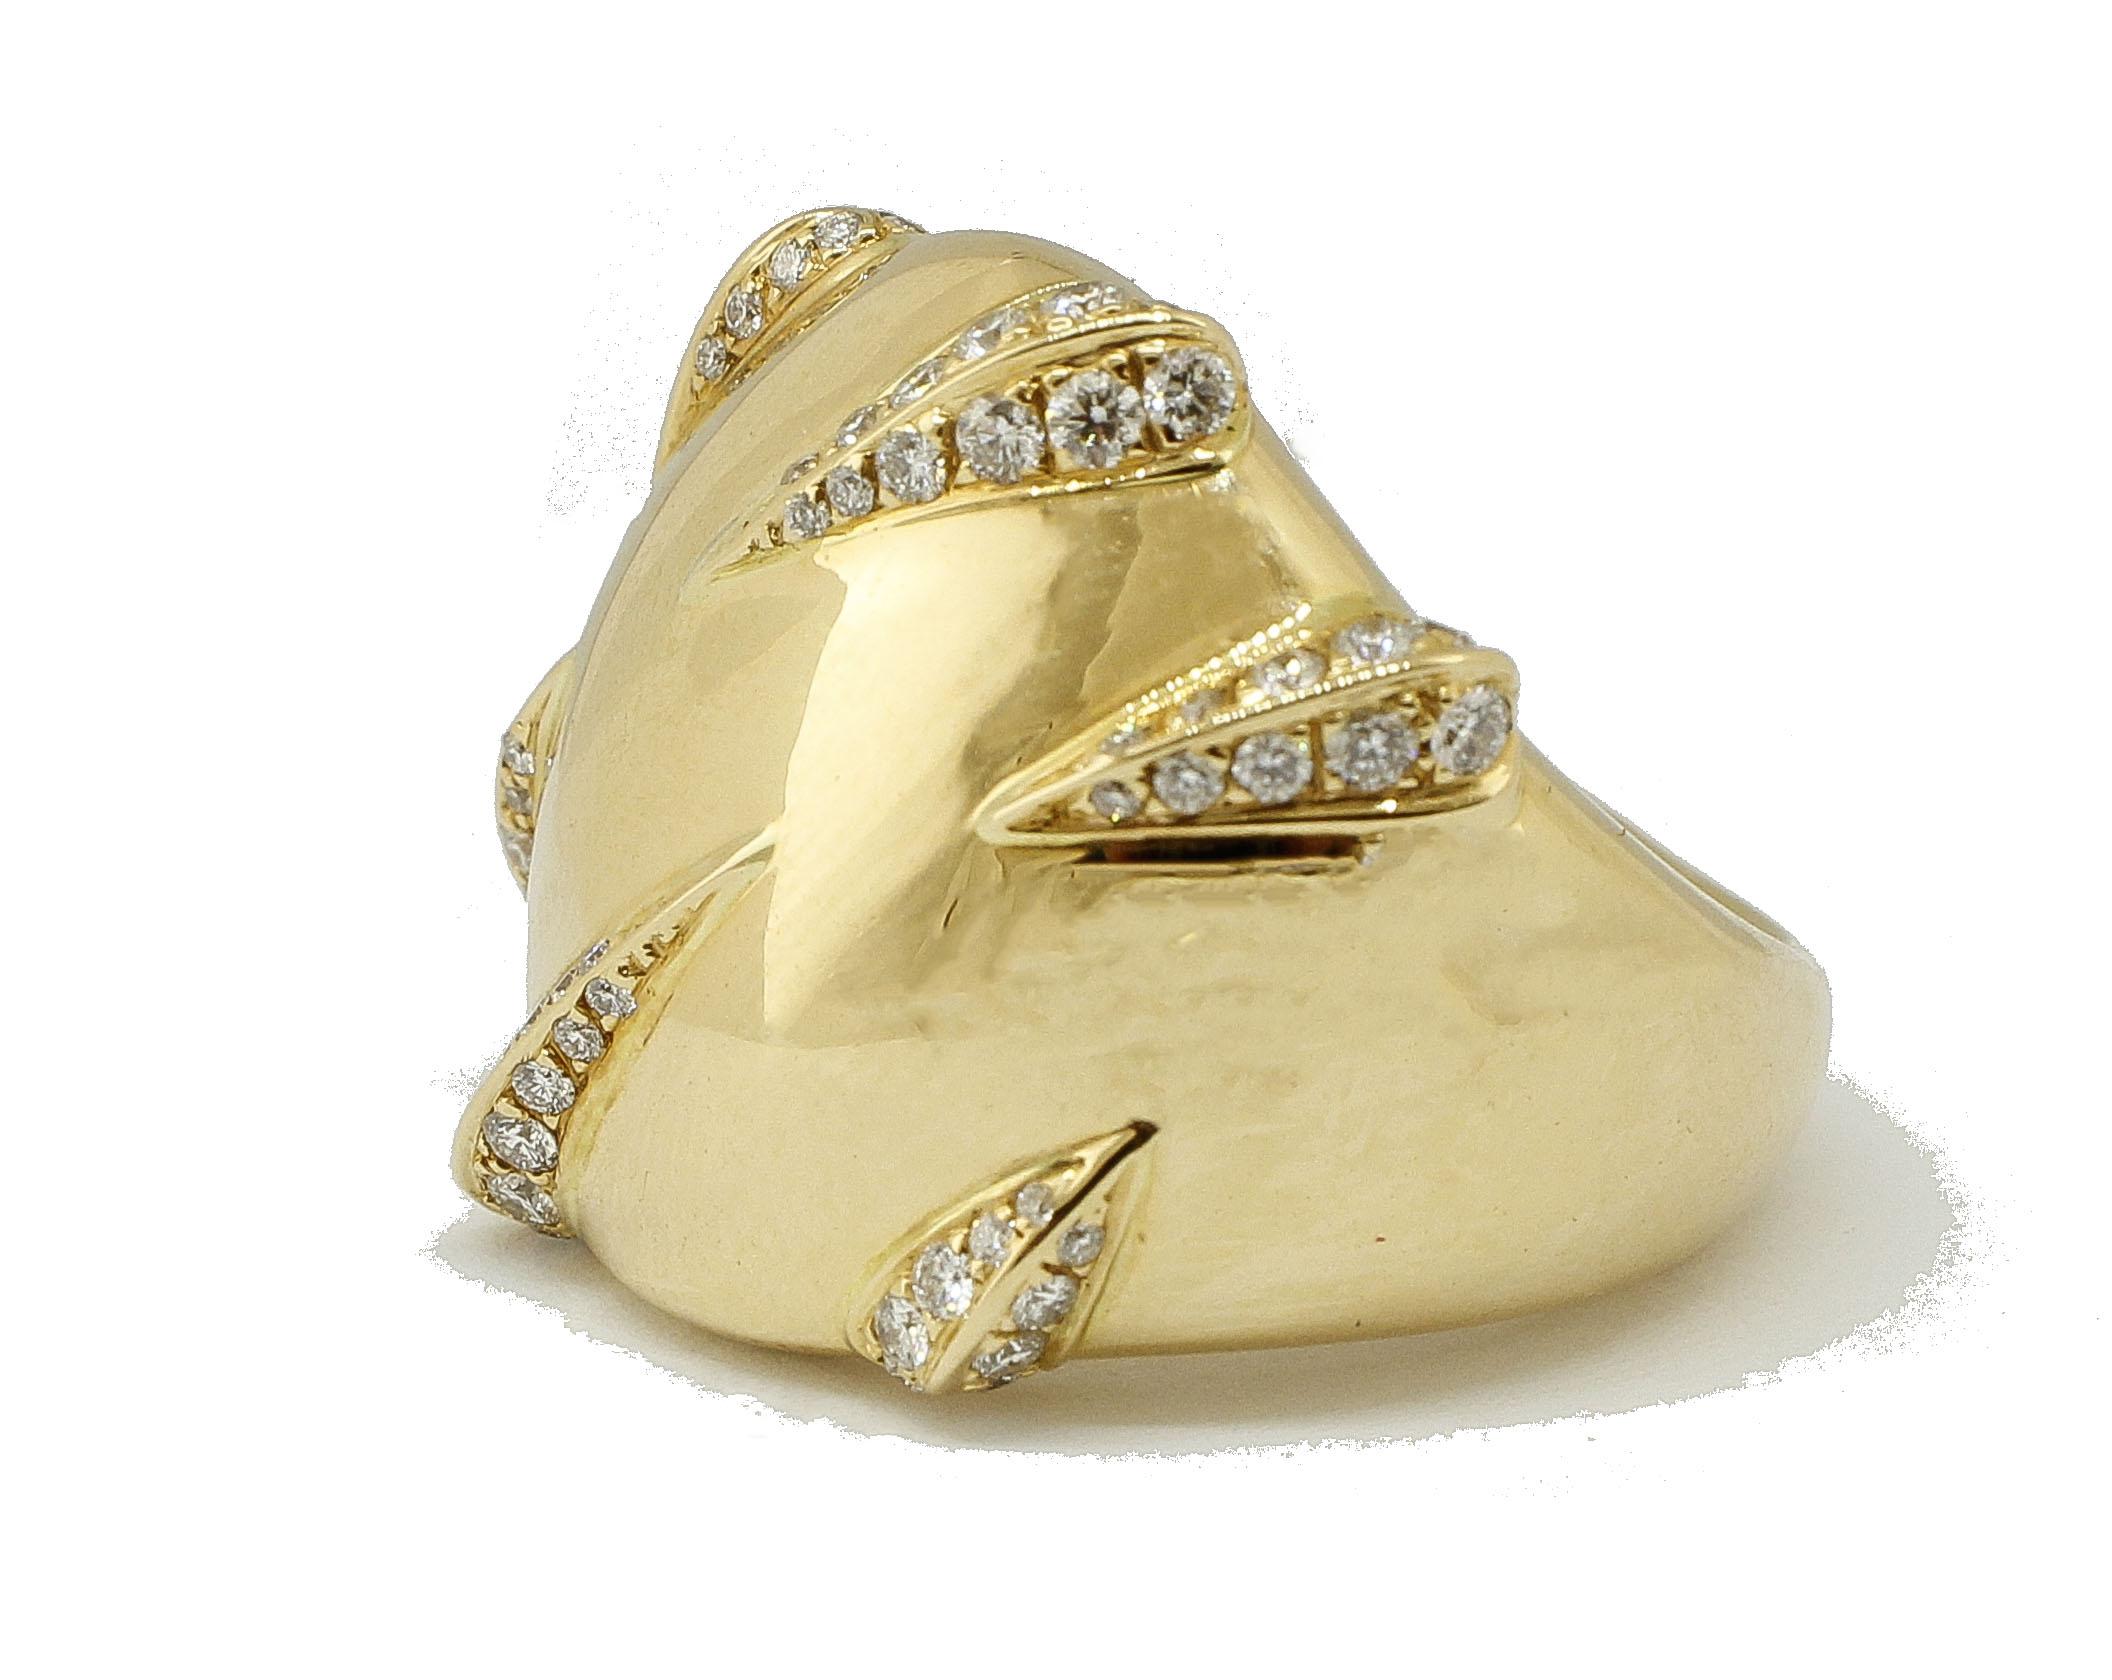 SHIPPING POLICY:
No additional costs will be added to this order.
Shipping costs will be totally covered by the seller (customs duties included).

Cartier dome ring in 18kt yellow gold embellished with encrusted diamonds.
diamonds 0.62kt
tot weight